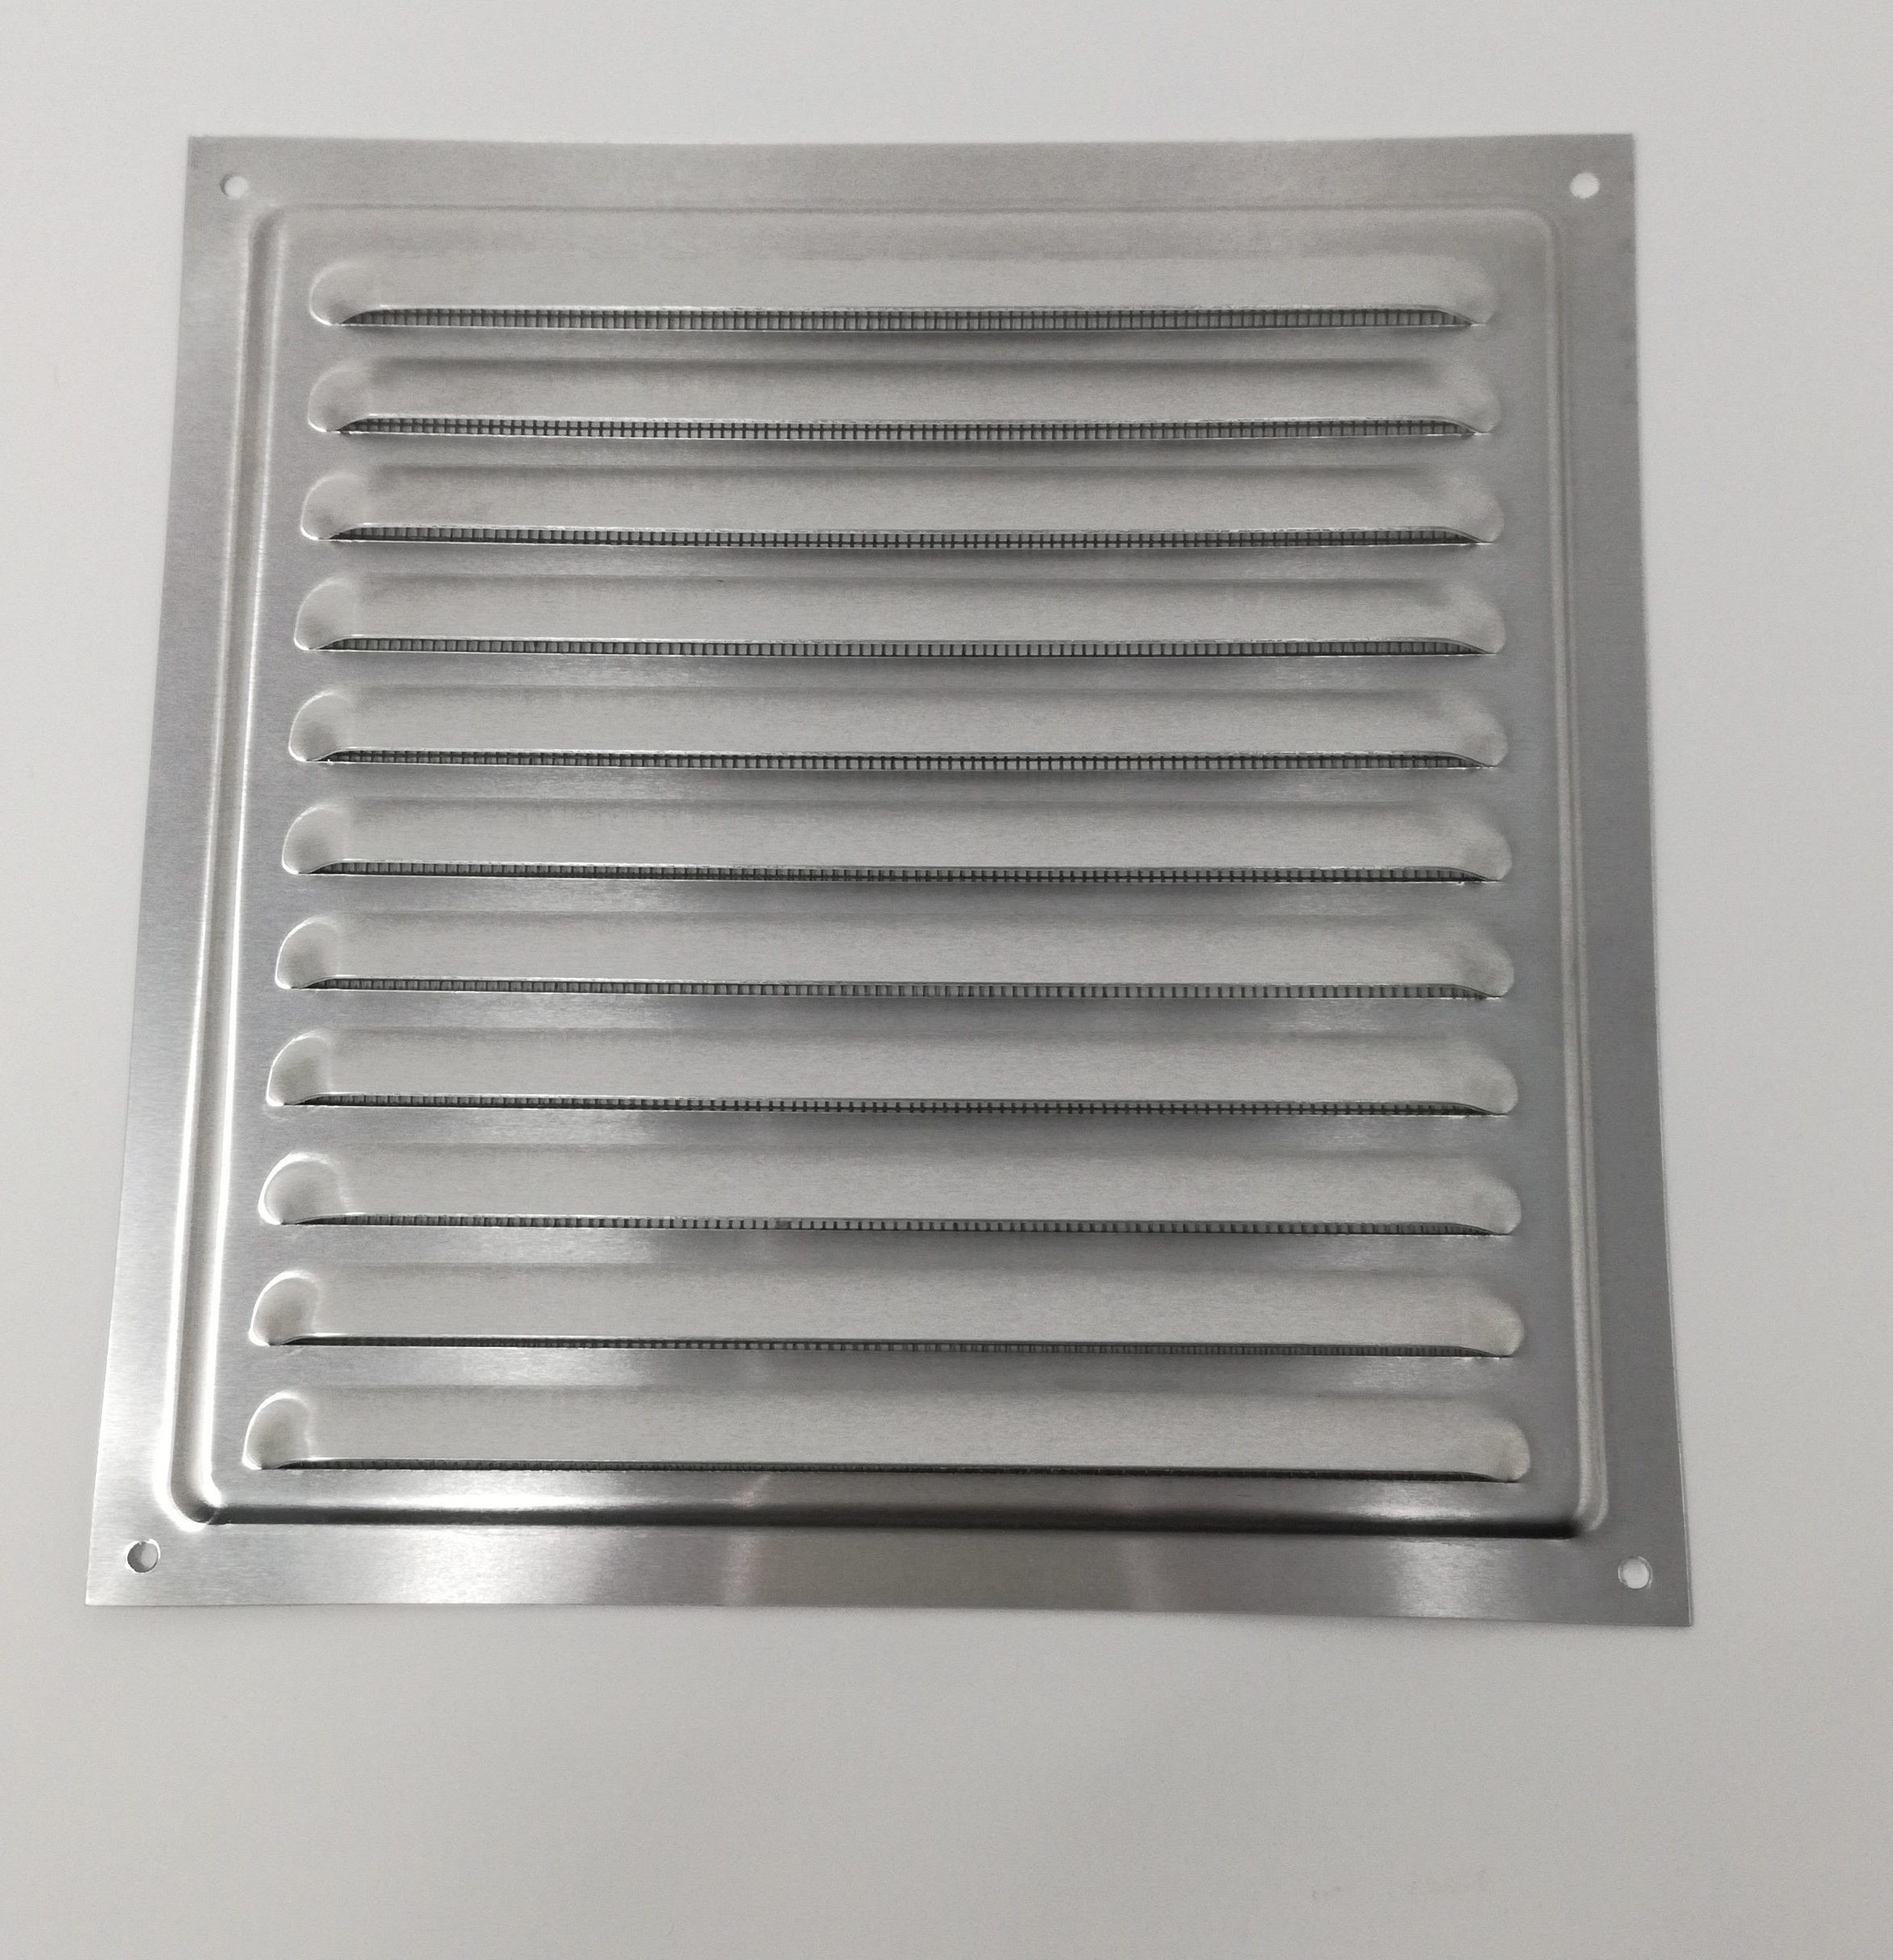 Air Vent Grill – 200 x 200 mm Metal – Aluminium Rust Free with Mosquito /  Bug Net – N Nickells